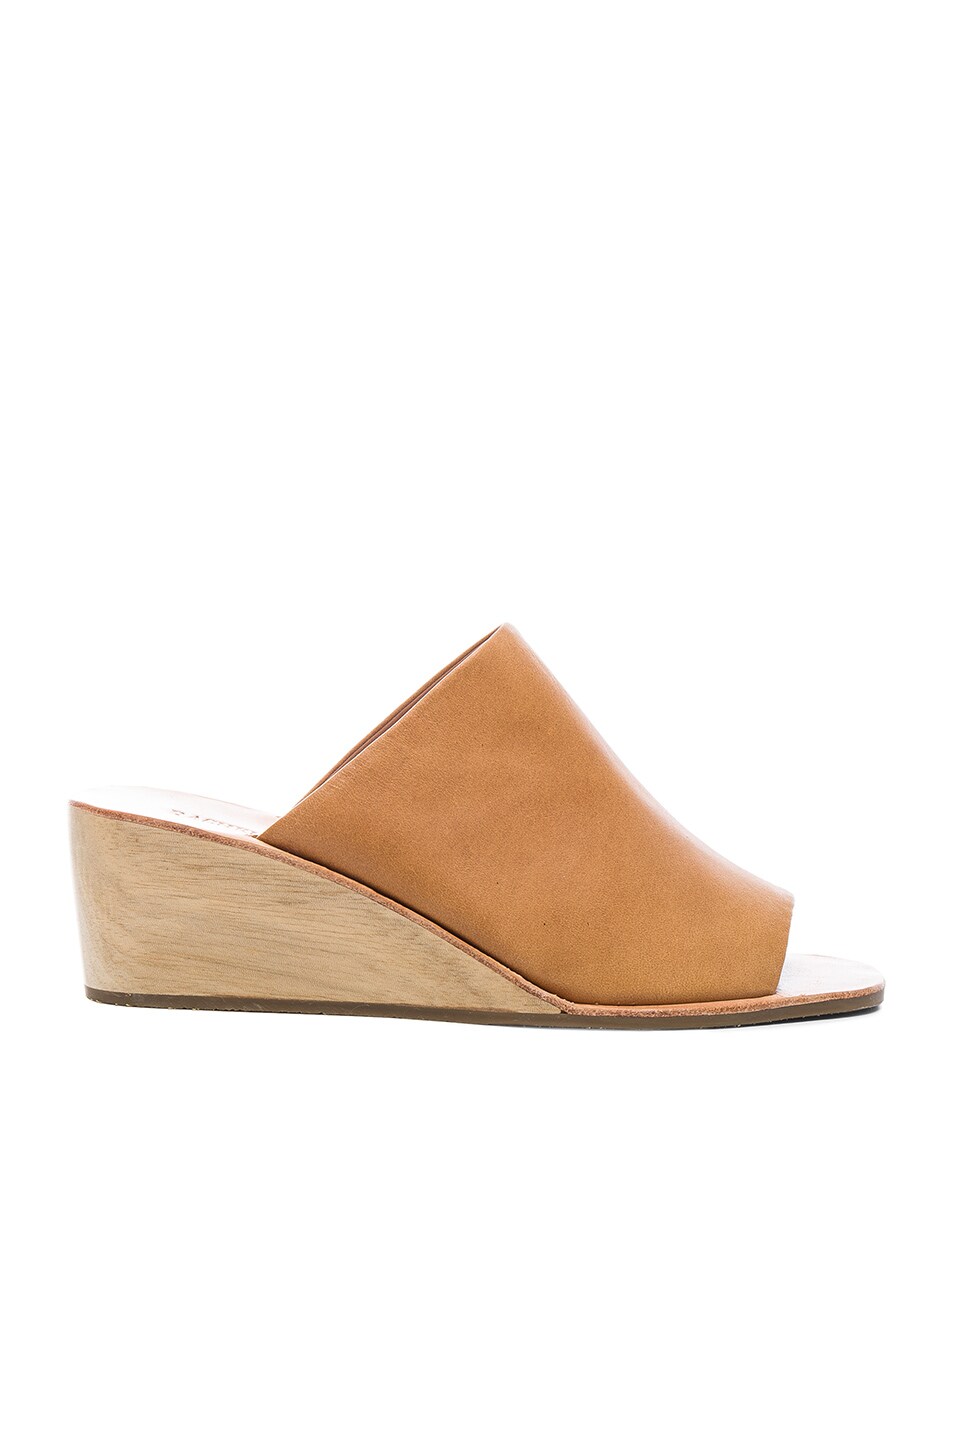 Image 1 of Rachel Comey Leather Lyell Wedges in Polished Wheat